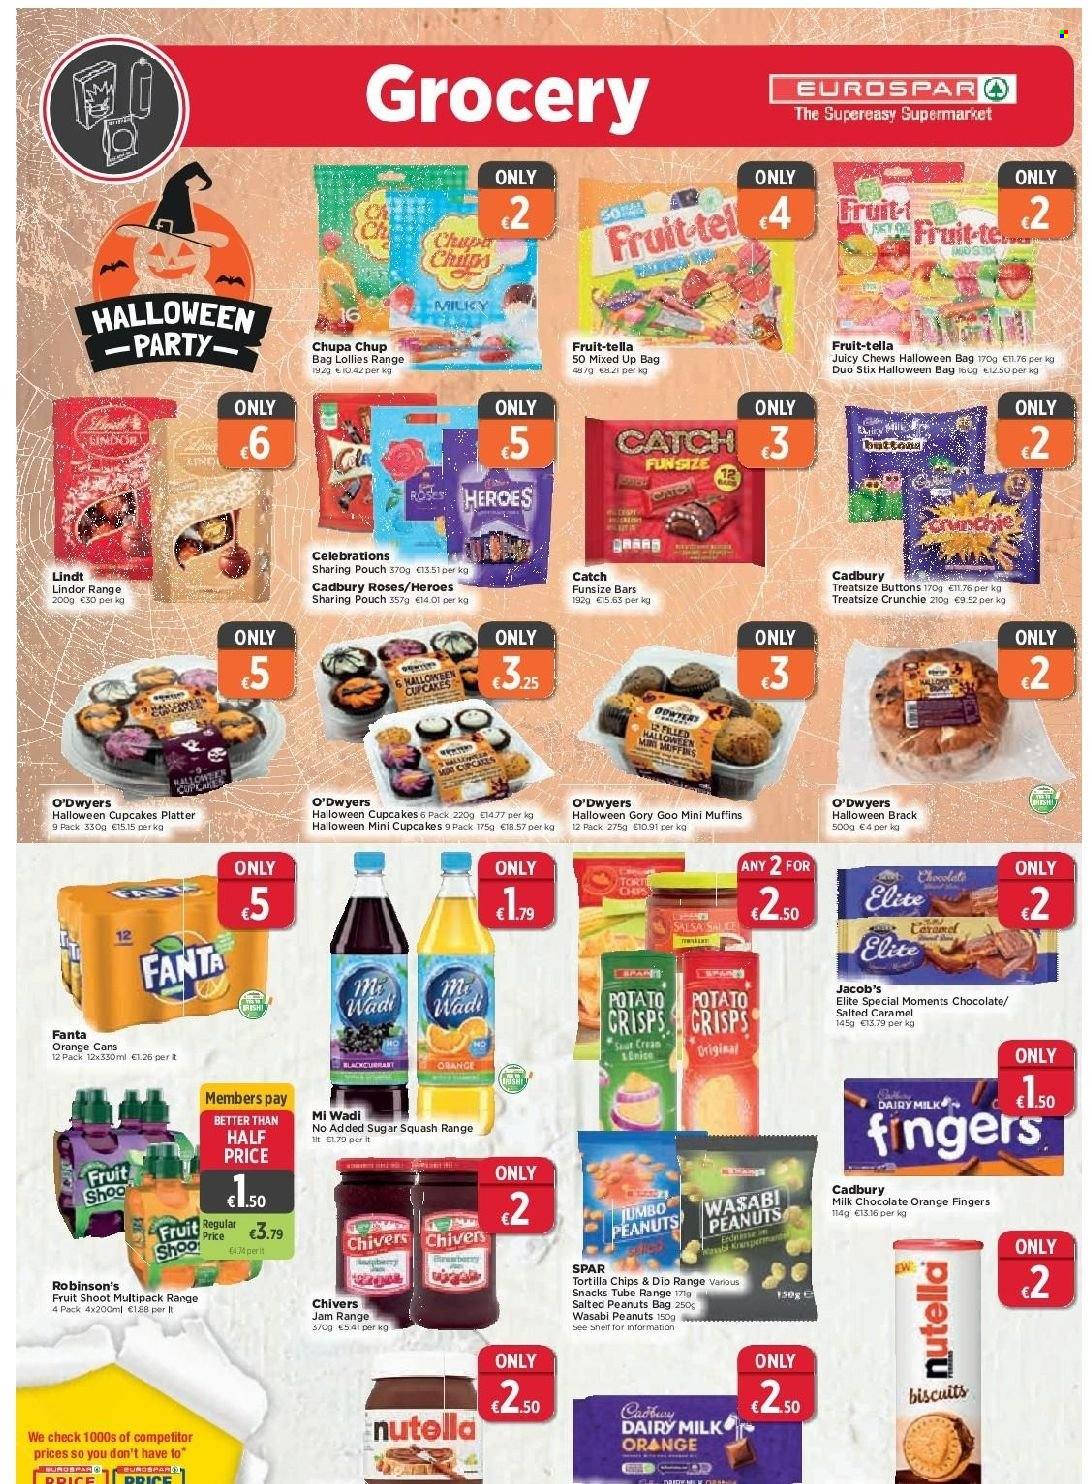 thumbnail - EUROSPAR offer  - 30.09.2021 - 20.10.2021 - Sales products - cupcake, muffin, O'Dwyers, milk chocolate, Nutella, chocolate, snack, Lindt, Lindor, Celebration, chewing gum, biscuit, Cadbury, Cadbury Roses, Dairy Milk, tortilla chips, chips, wasabi, salsa, fruit jam, peanuts, Fanta, Moments. Page 4.